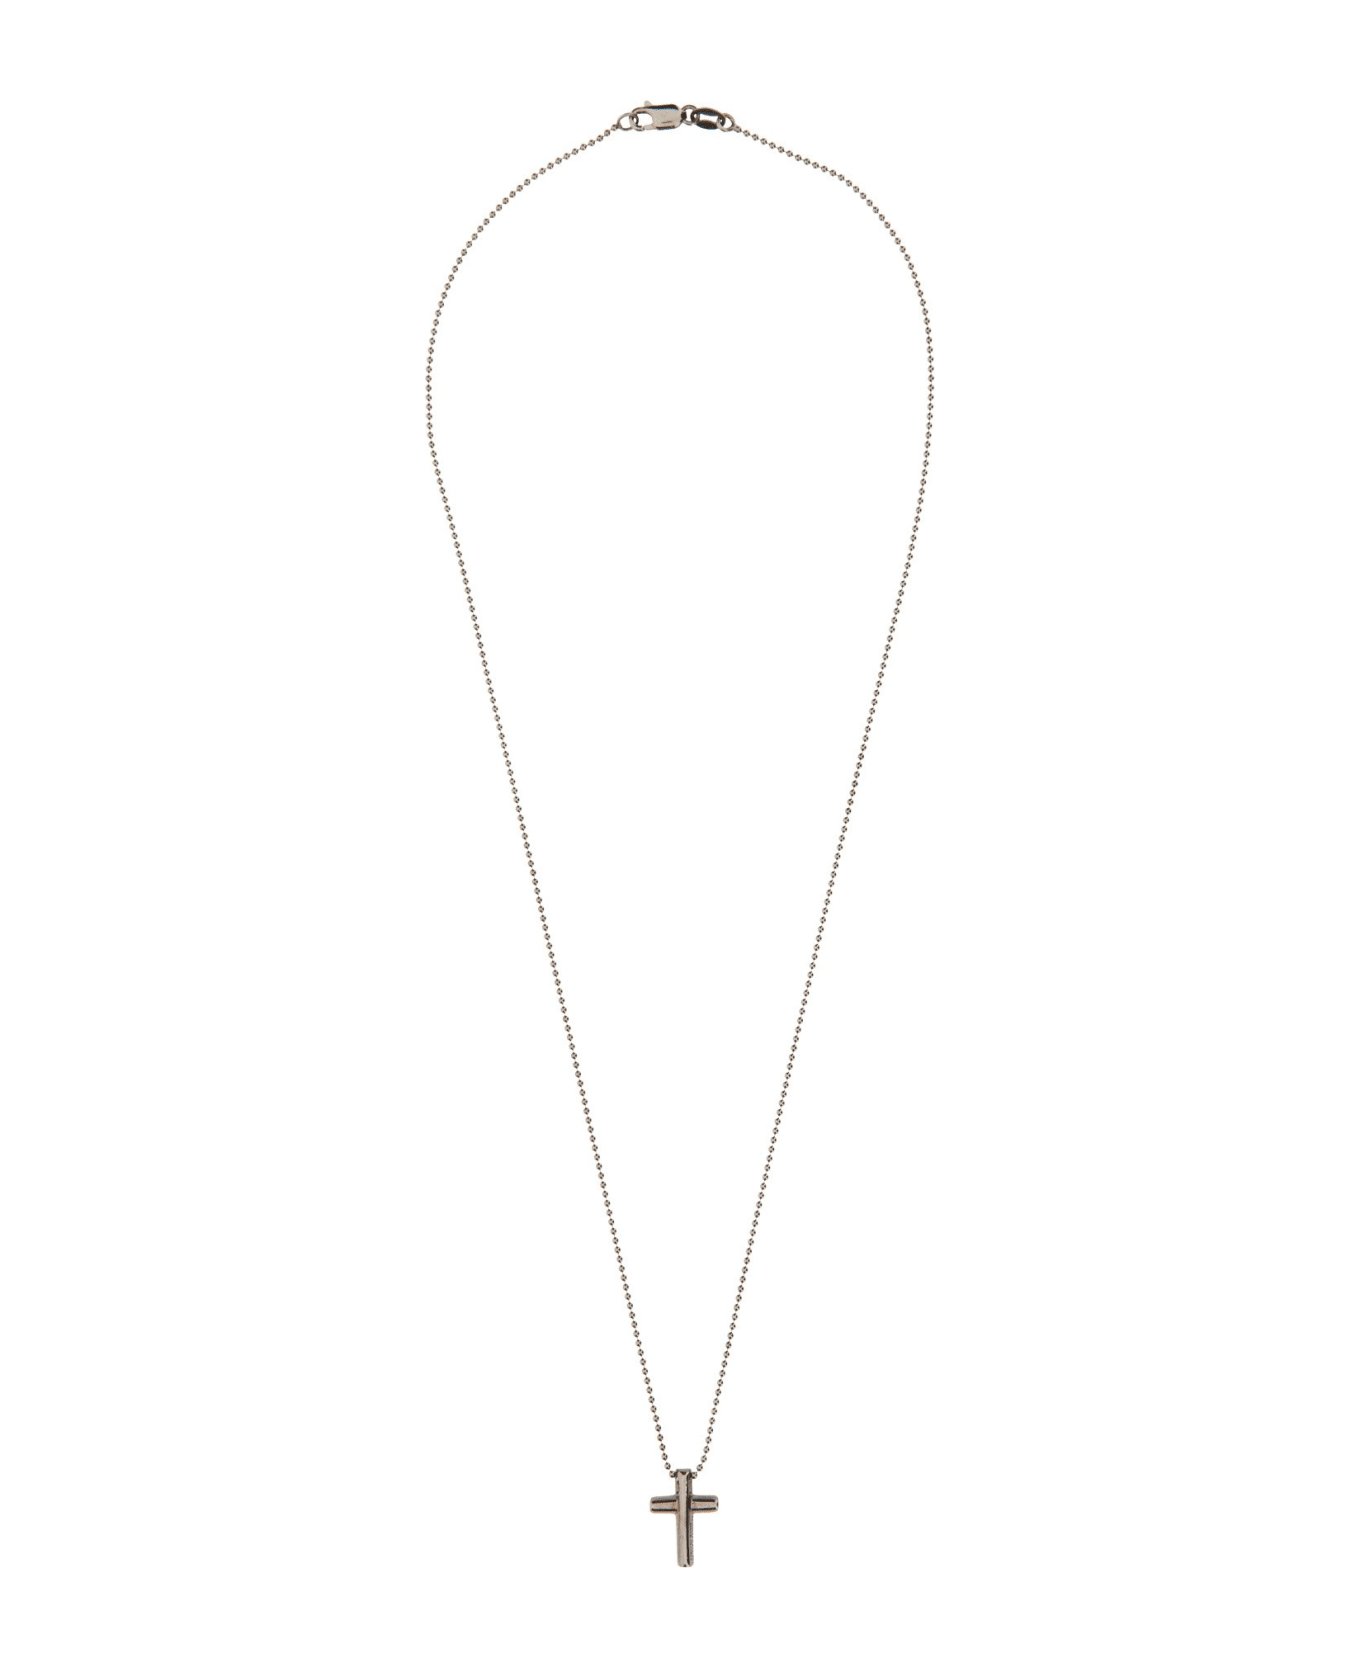 Dsquared2 Cross Necklace - ANTRACITE